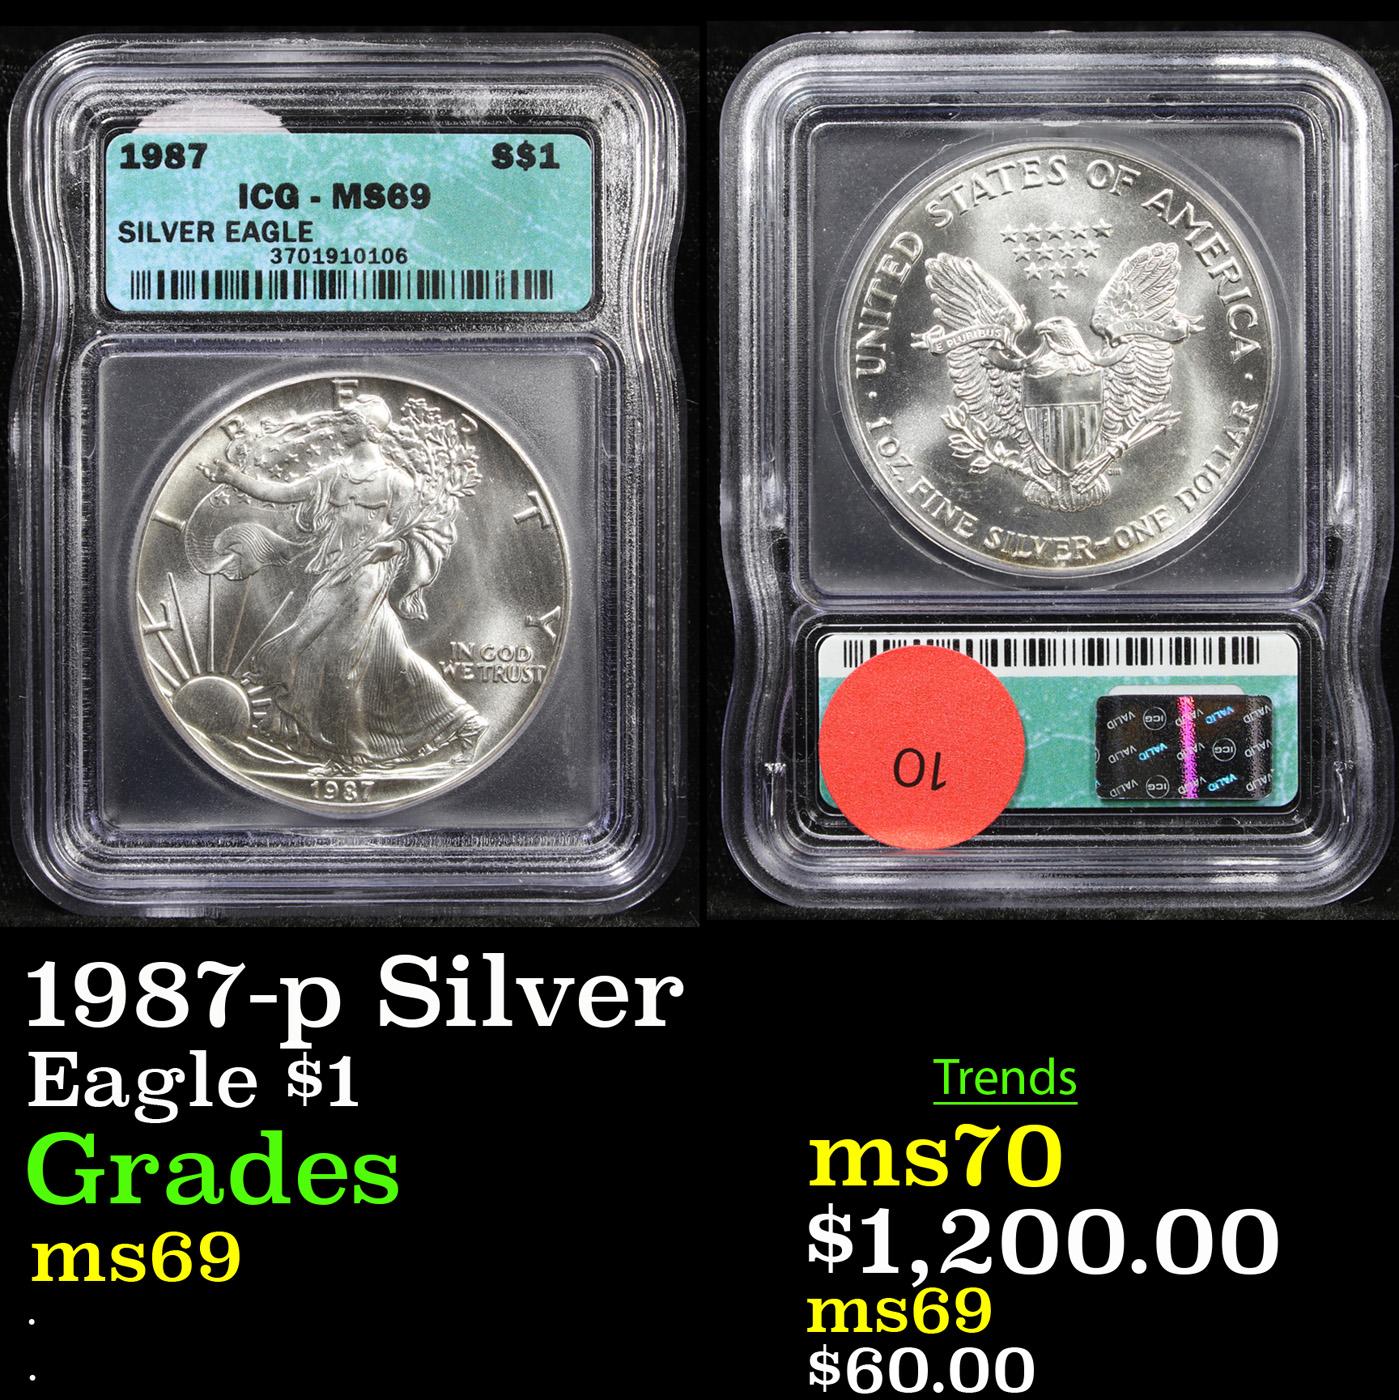 1987-p Silver Silver Eagle Dollar $1 Graded ms69 By ICG.